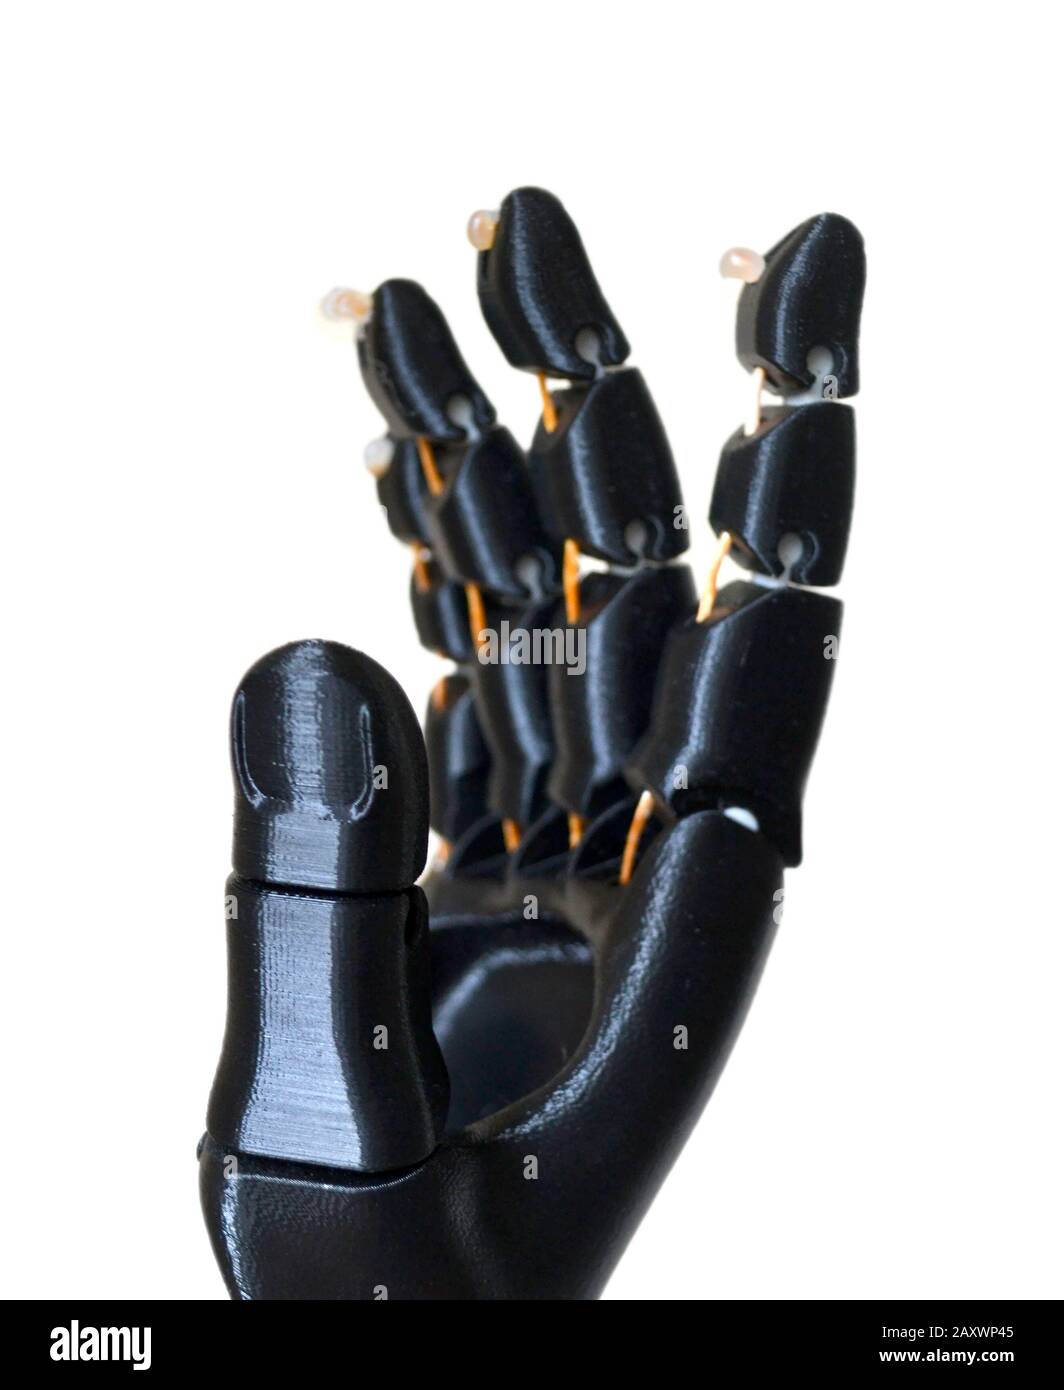 Robot hand fingers from plastic. Isolated on white background. Automatic three dimensional performs plastic modeling. Modern 3D printing technology. Stock Photo